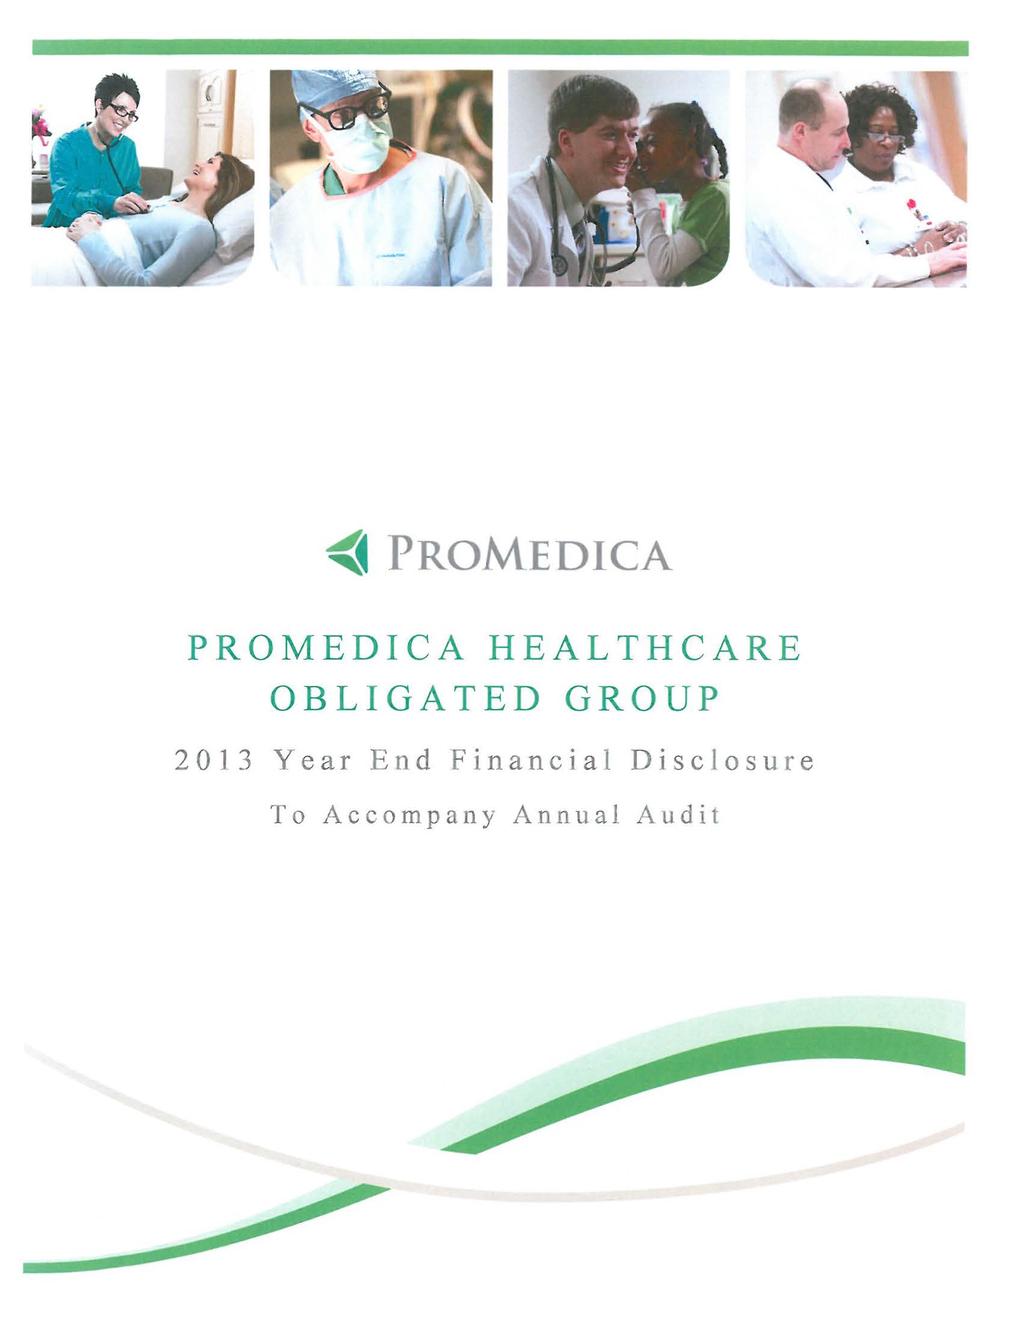 PROMEDICA HEALTHCARE OBLIGATED GROUP 2013 Year